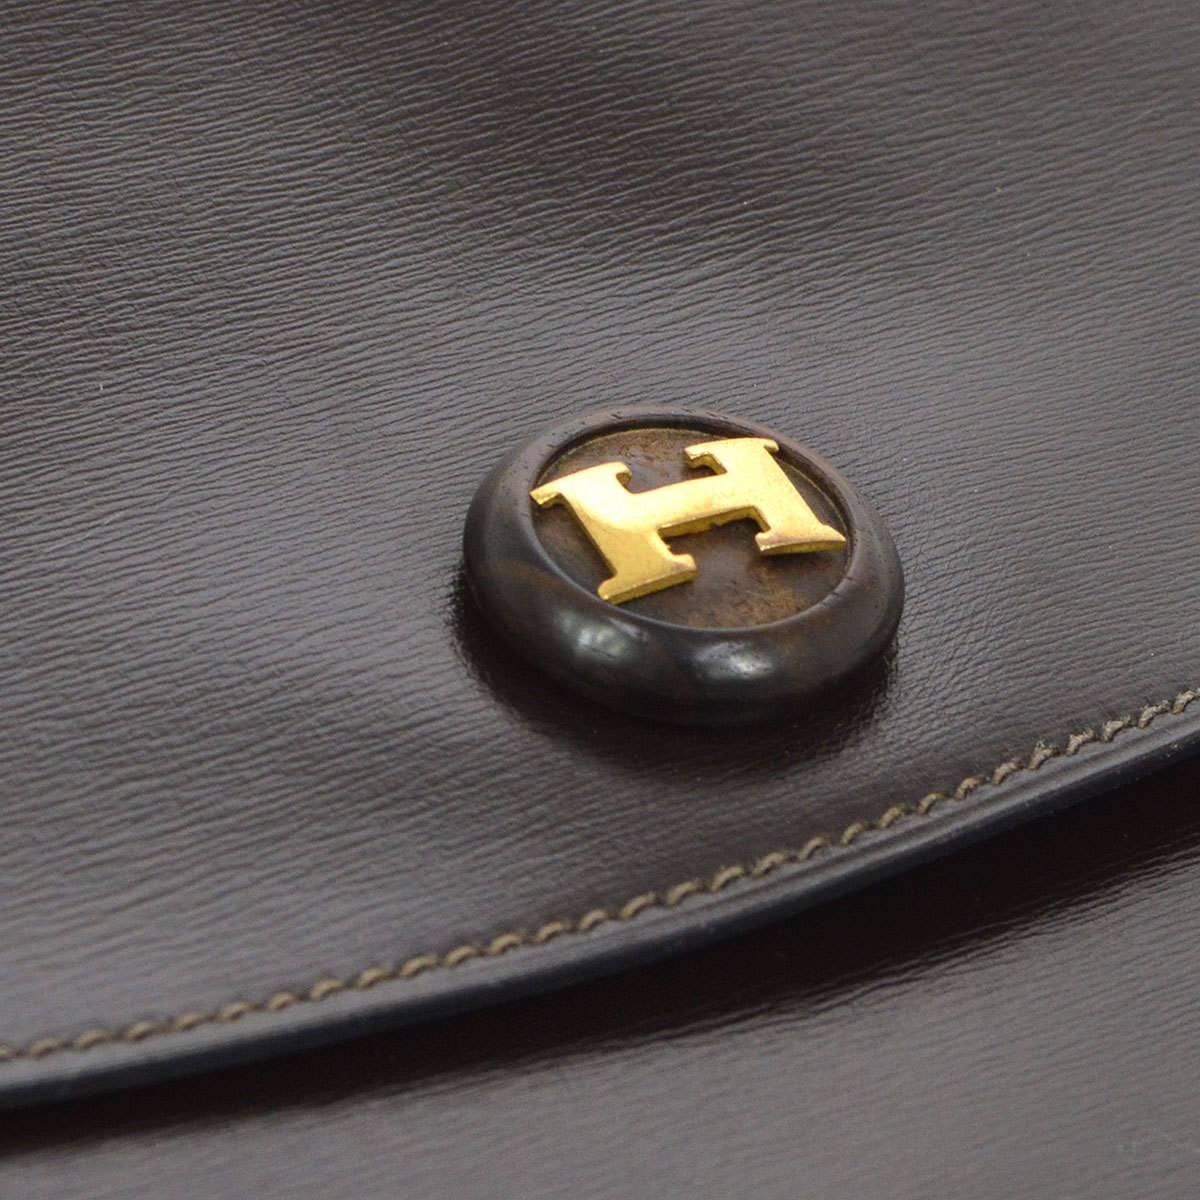 Hermes Dark Brown Chocolate Leather Envelope Evening Clutch Flap Bag

Leather
Snap button closure
Made in France
Measures 9.5